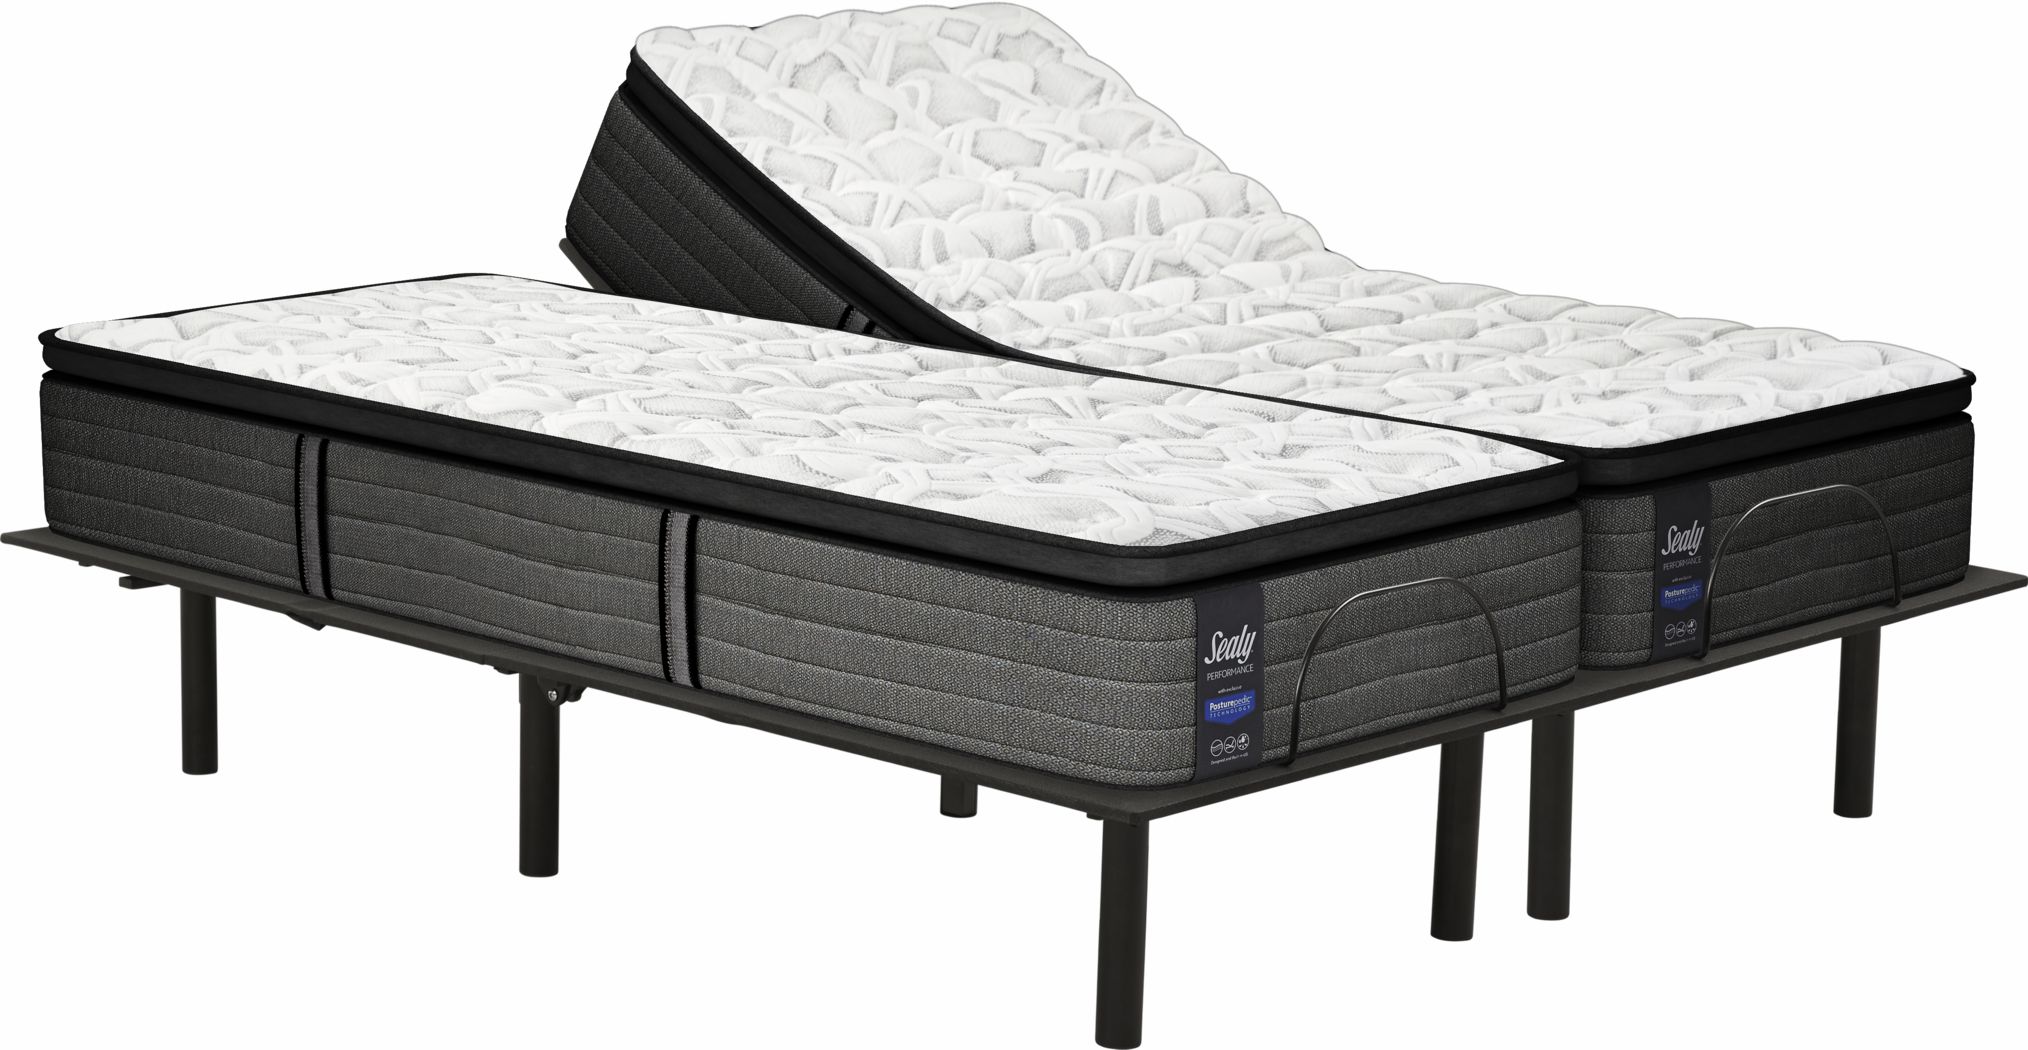 sealy mattress for adjustable bed